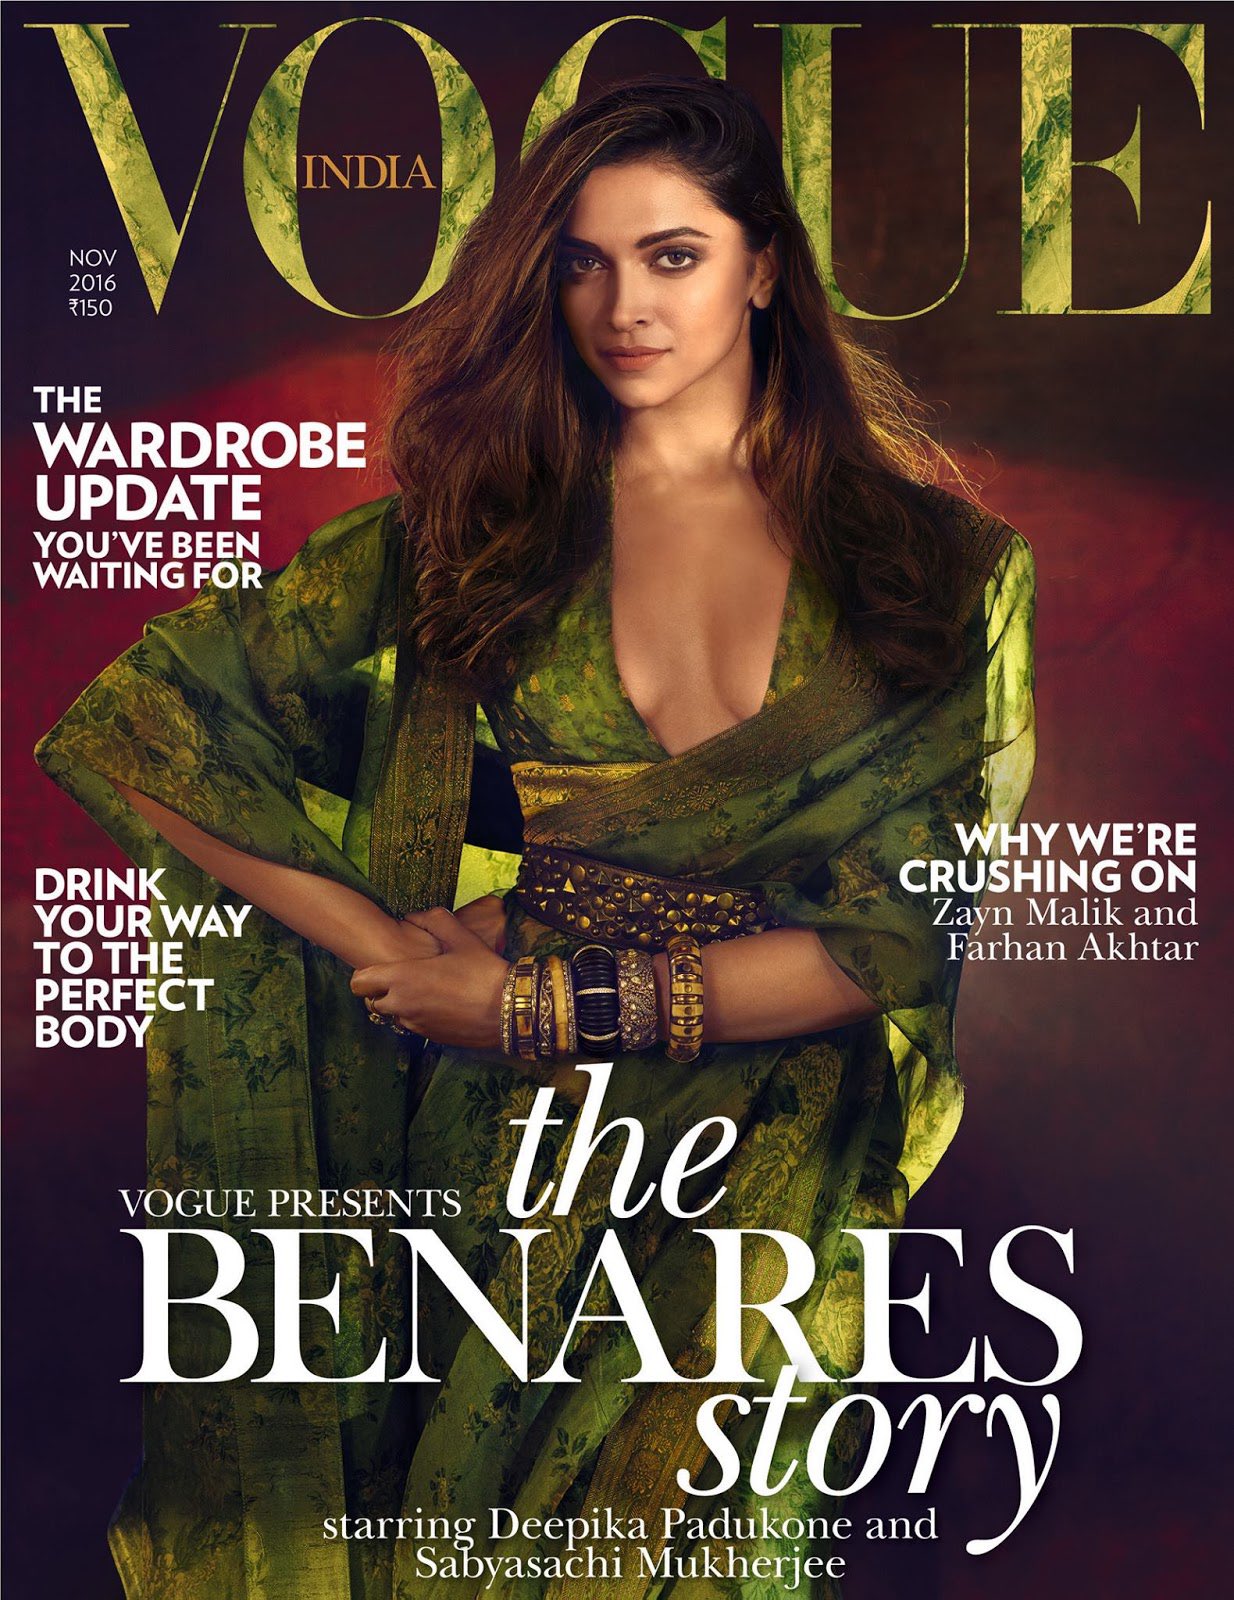 Nancy Wang Yuen on X: Here are Deepika Padukone's Vogue India  covers/photos. She is luminescent!  / X